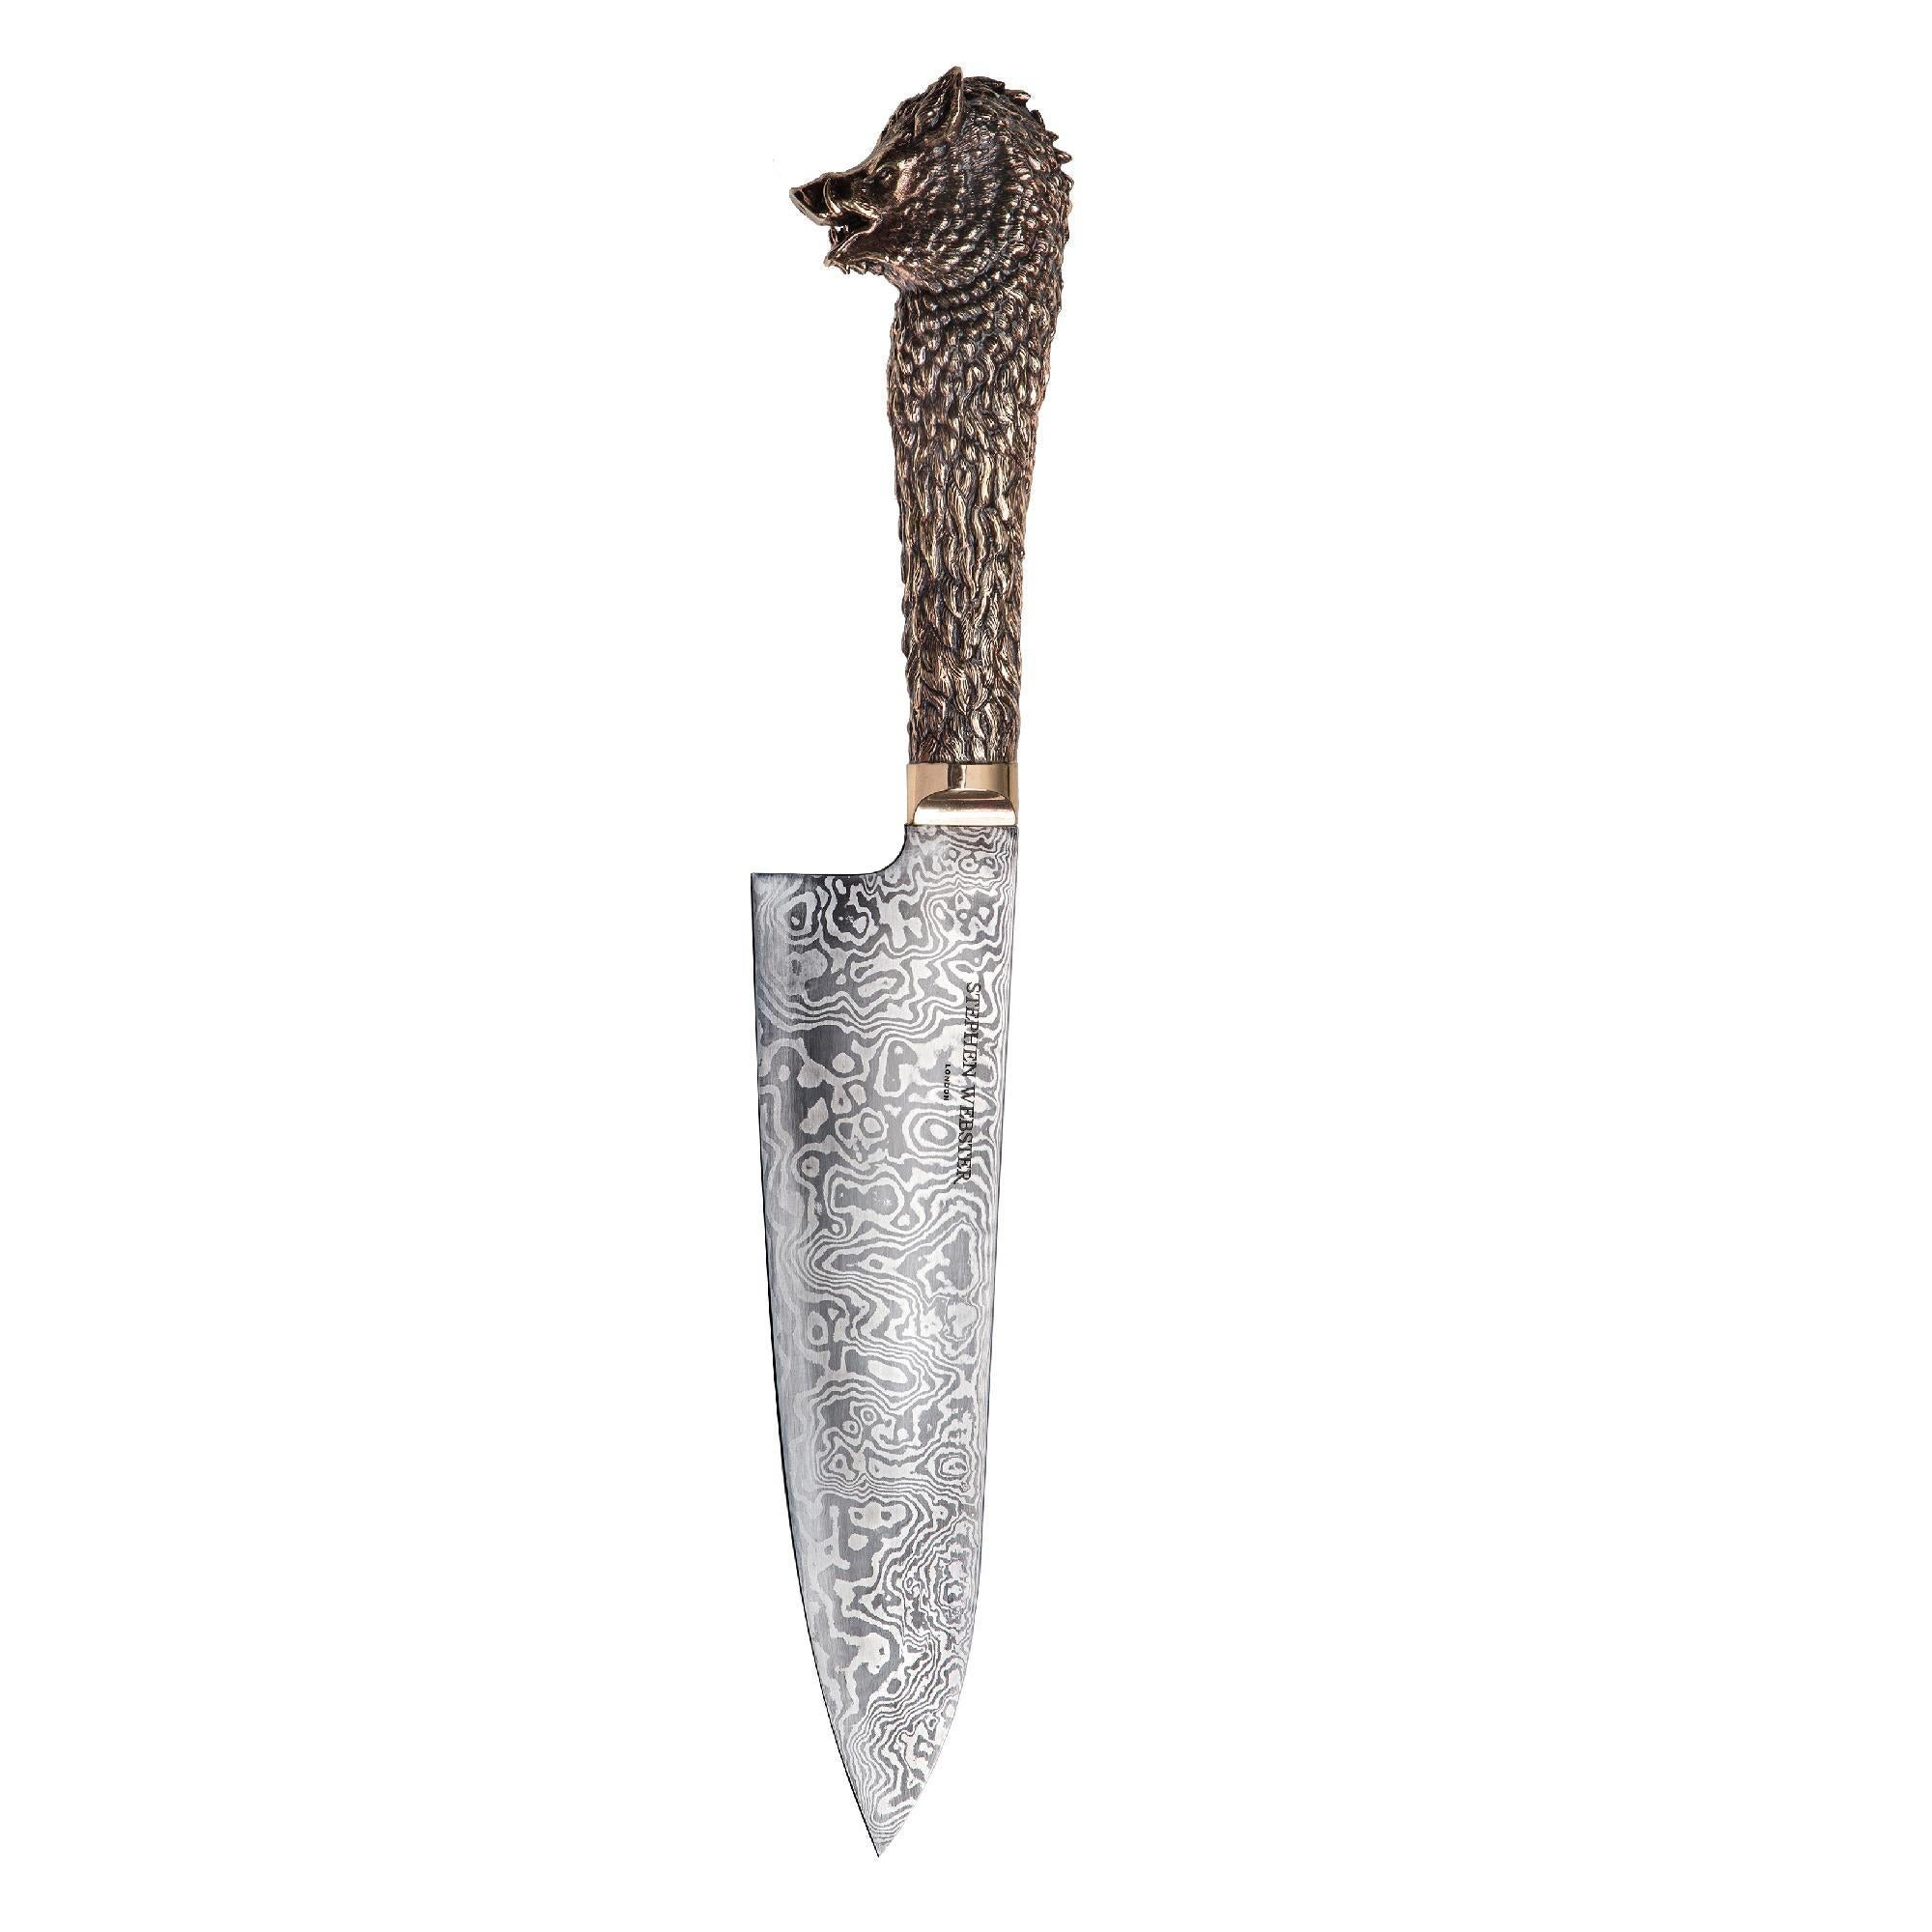 Stephen Webster Beasts Chef's Knives with Steel Blades and Bronze ...